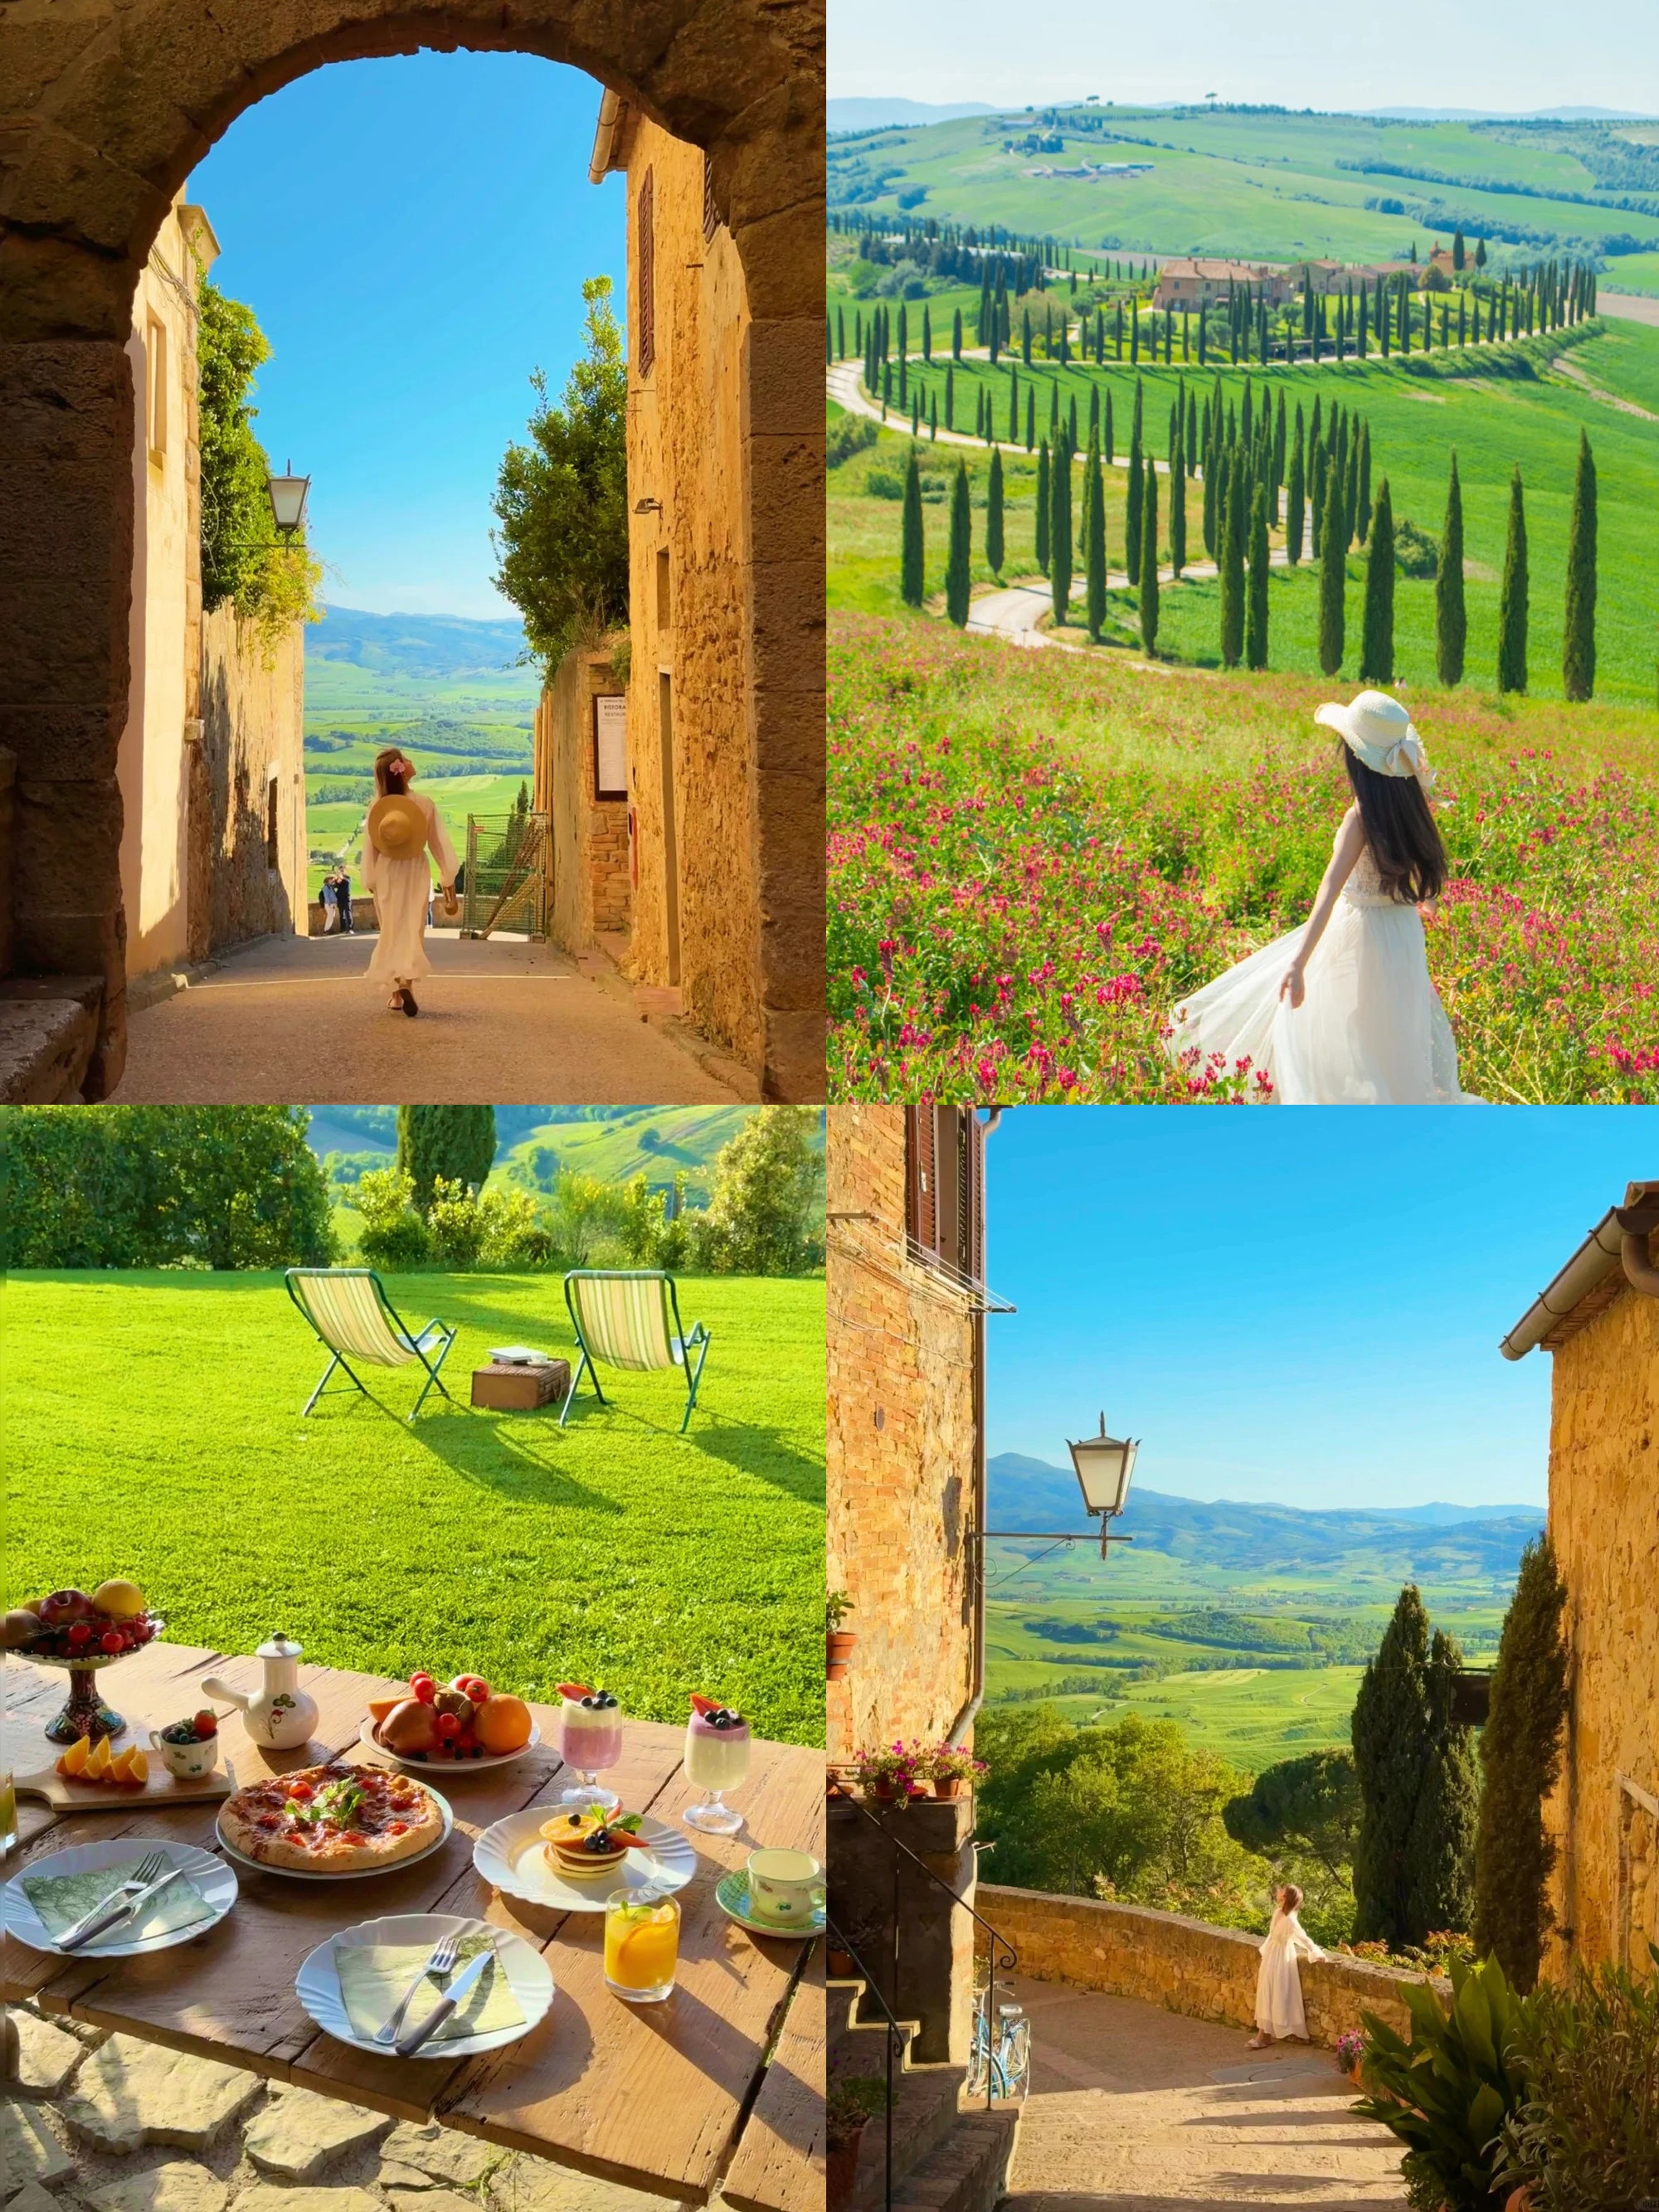 Tuscany - Life Should Be Savoured Here